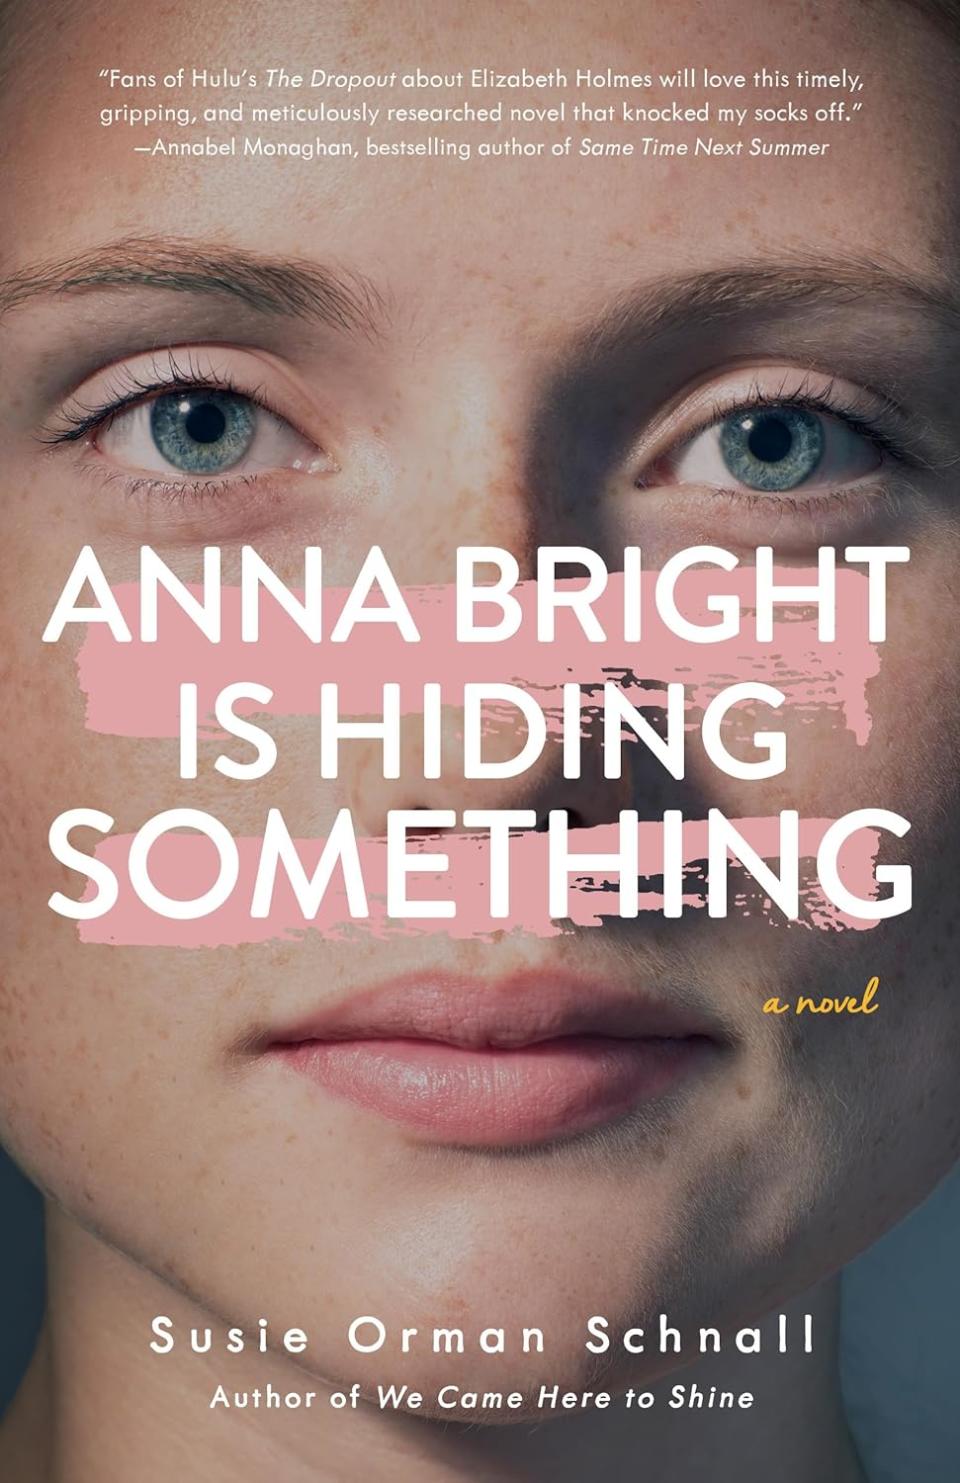 ‘Anna Bright is Hiding Something’ by Susie Orman Schnall